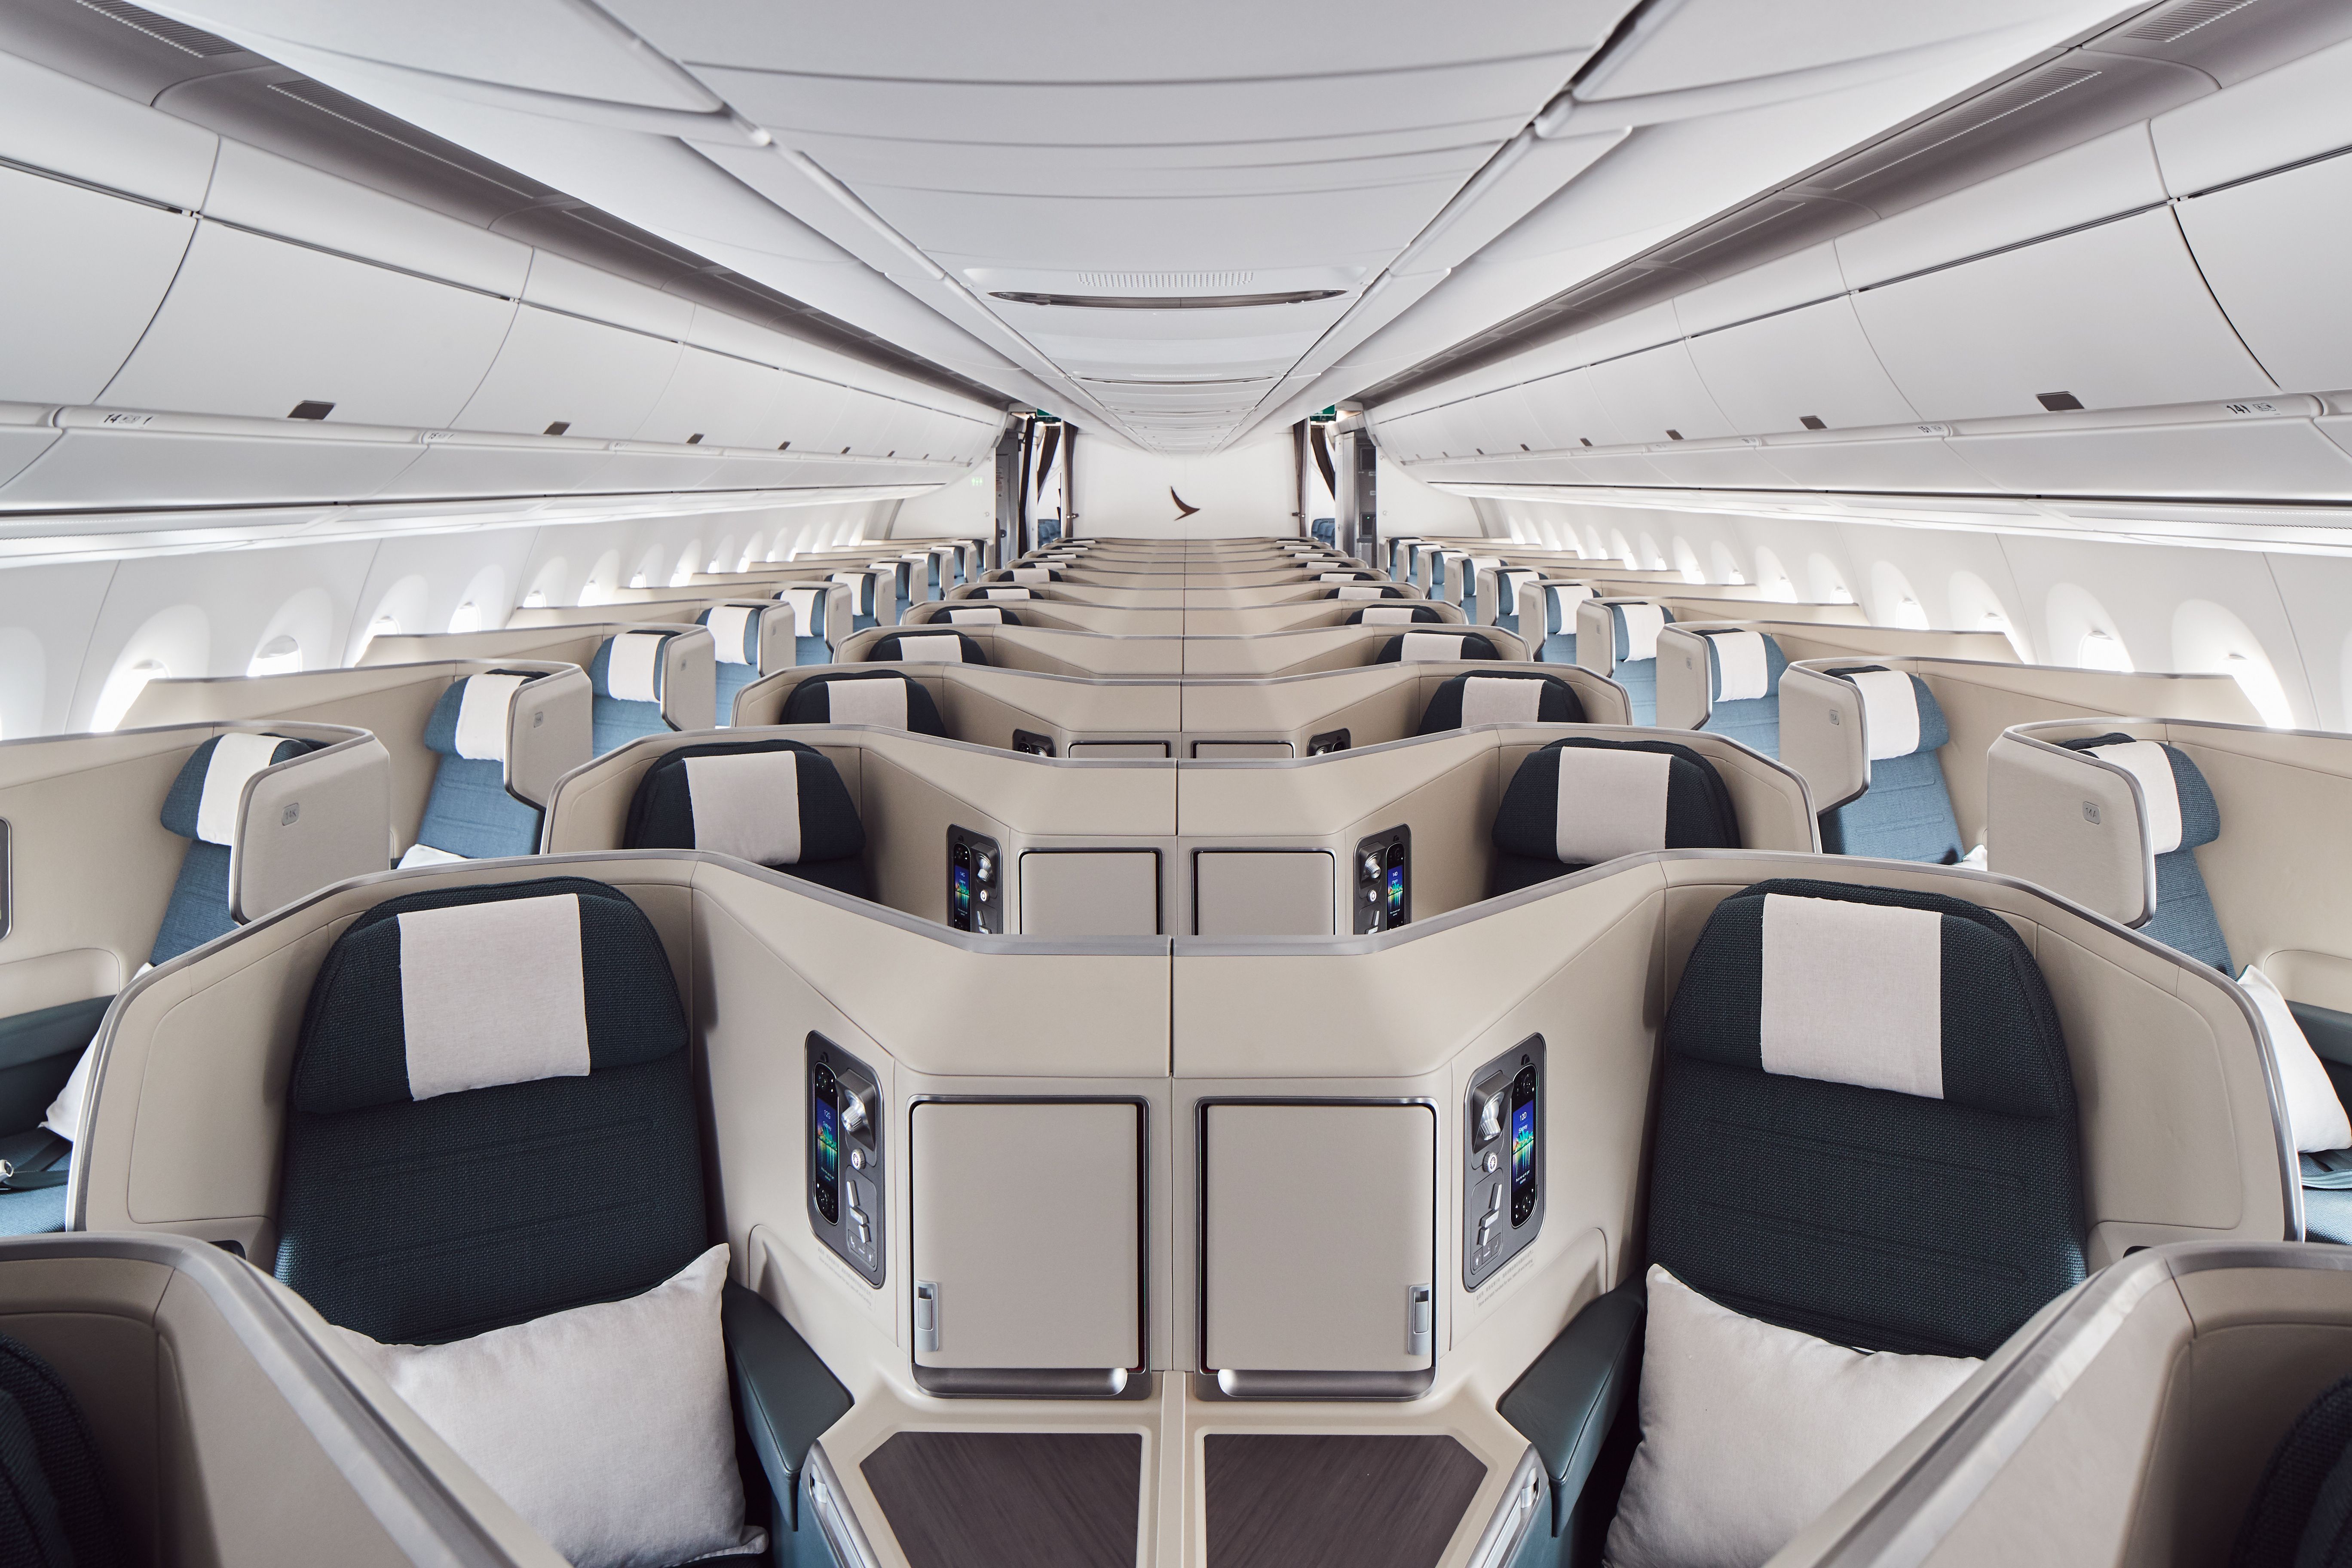 Cathay Pacific's A350 business cabin